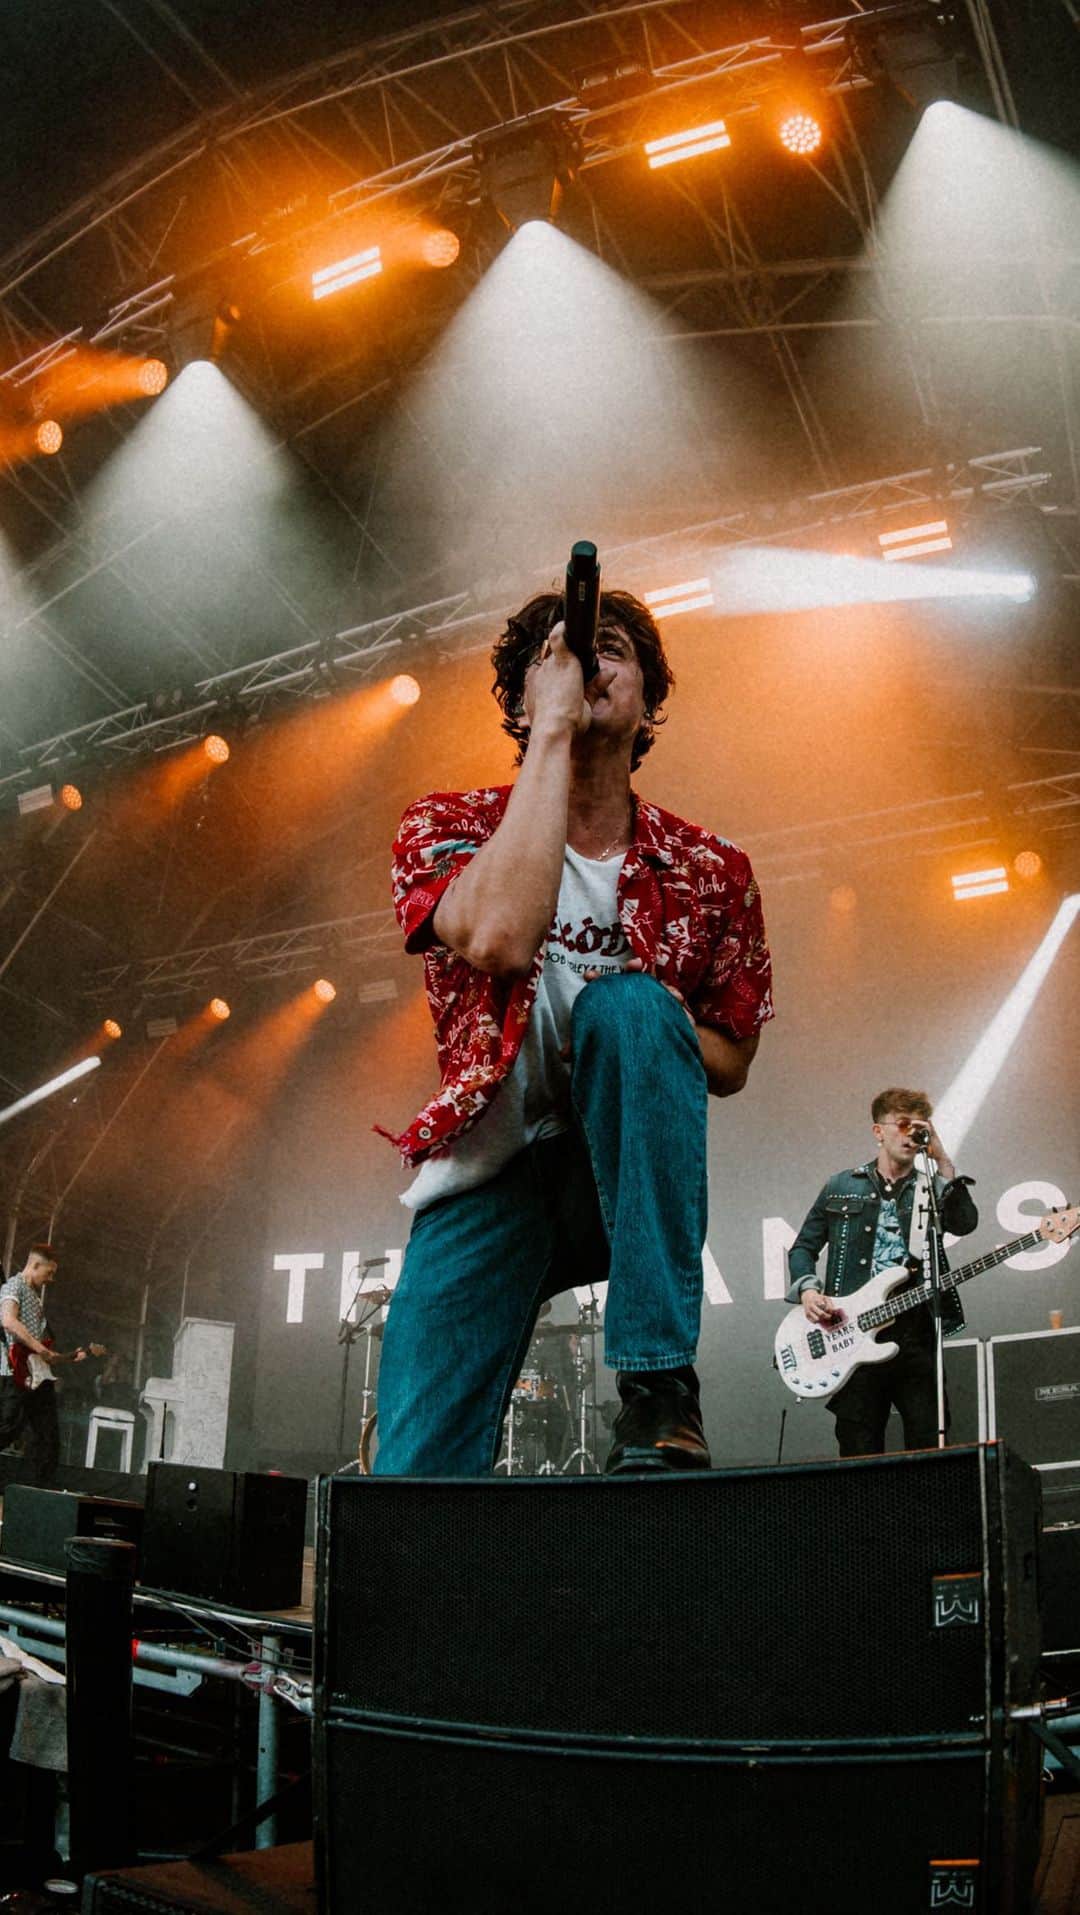 The Vampsのインスタグラム：「In It Together Festival was all the ☀️ vibes we’ve been waiting for. Such a sick way to kick off the summer shows. Check out the full episode on Vamps+ ✌🏼」